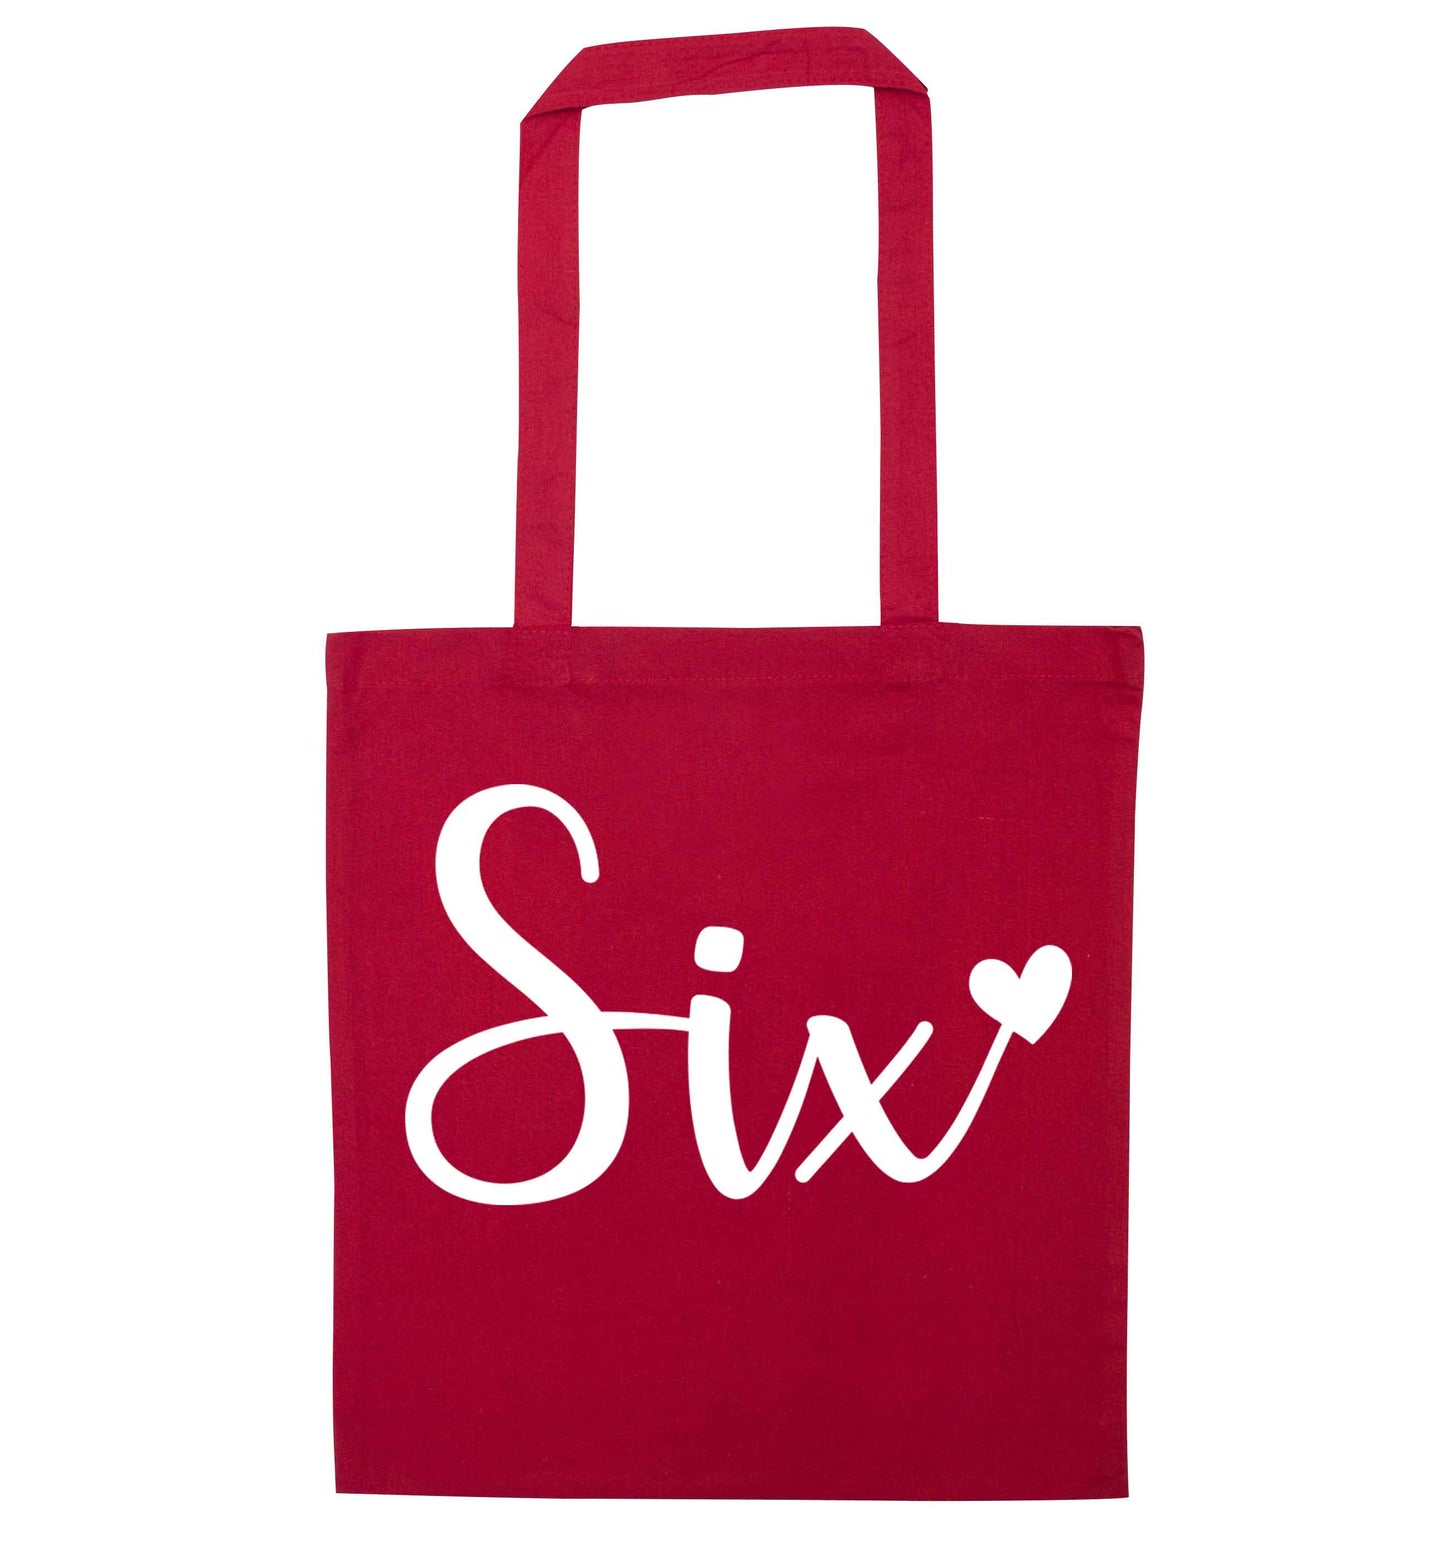 Six and heart! red tote bag